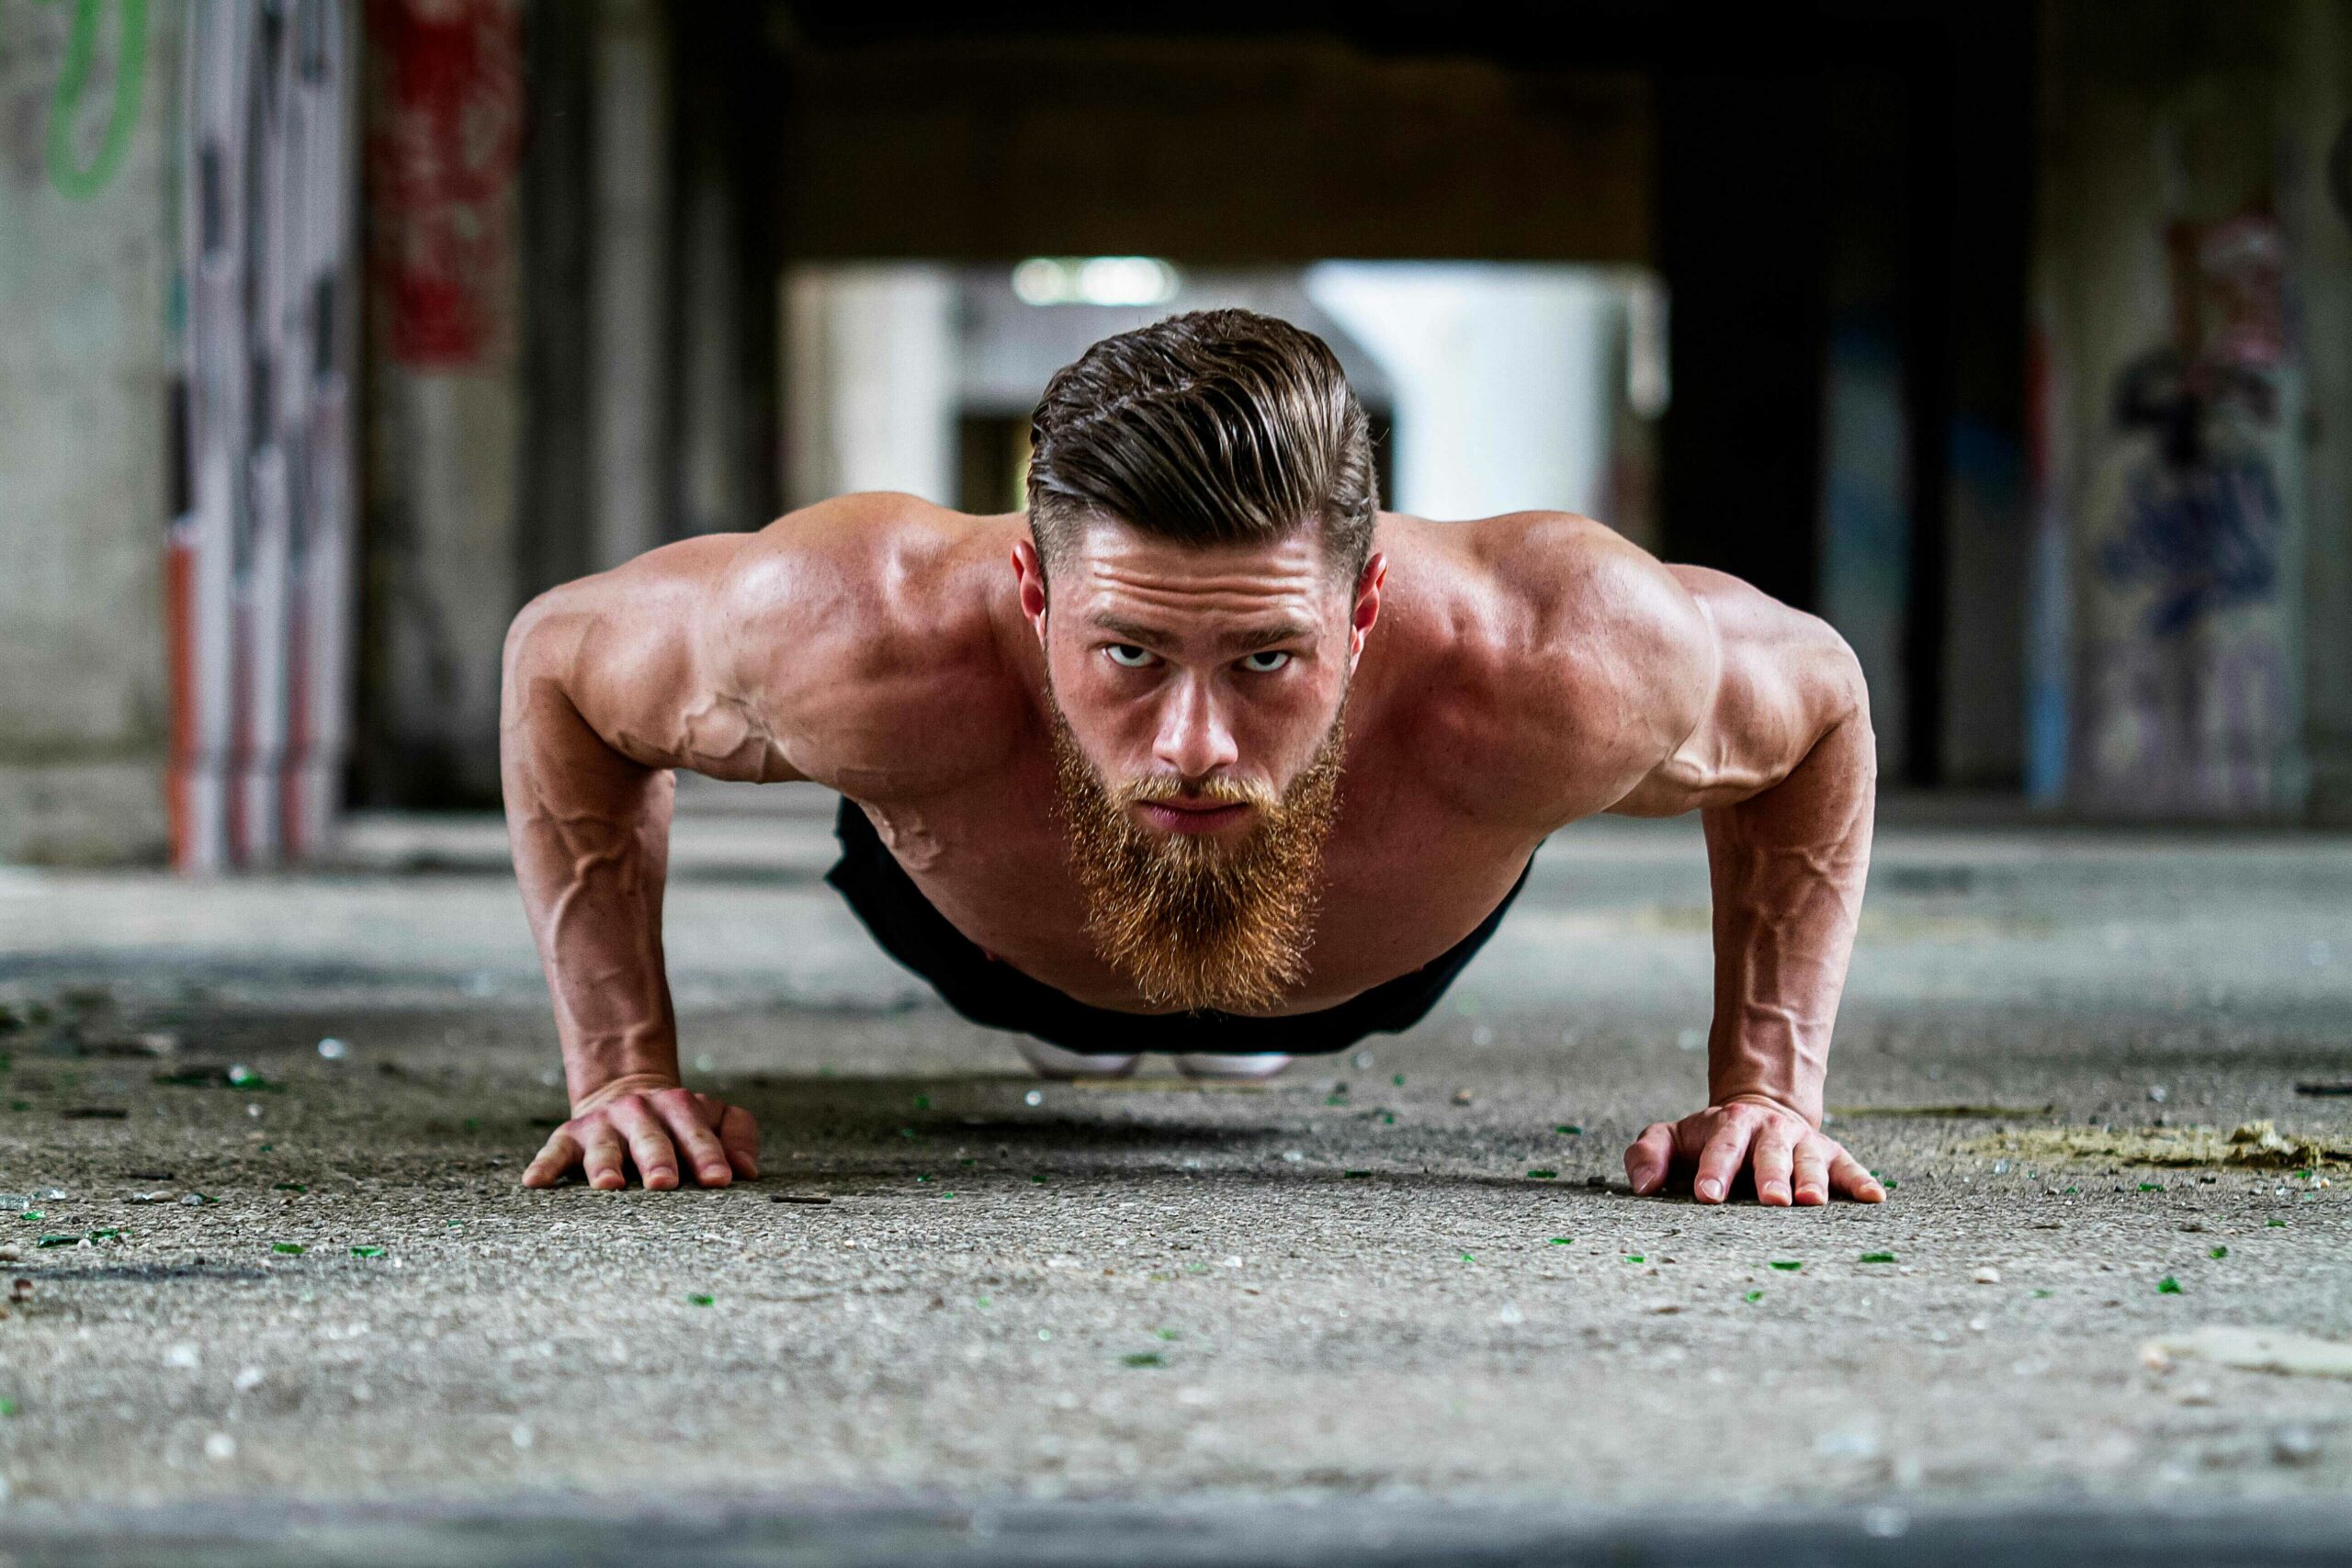 Can a home push-up workout outshine the bench?